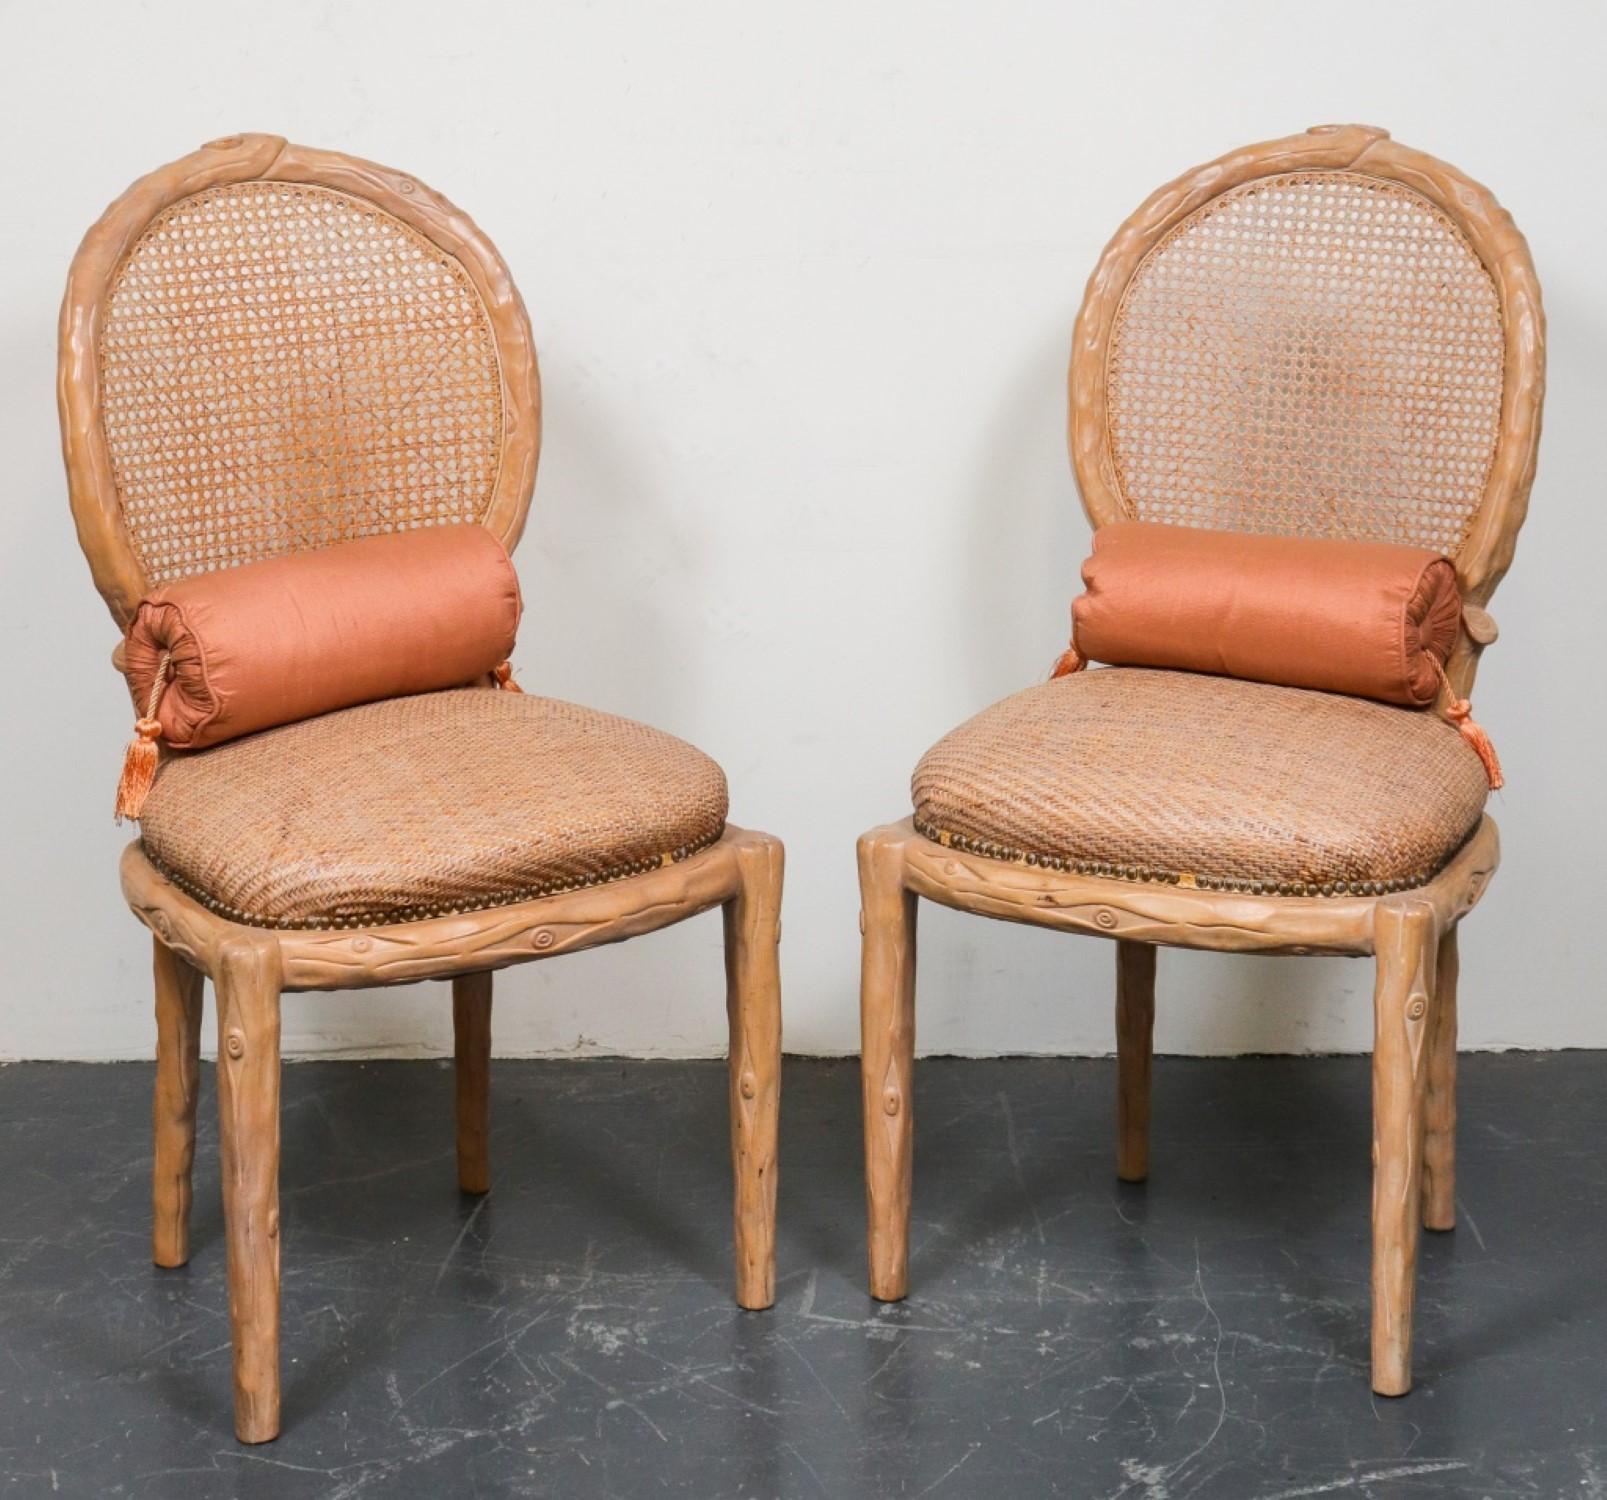 Pair of Faux Bois Side Chairs

Features: Caned backs, brass-studded wicker cushion seats, accompanied by silk upholstered bolster pillows.

Dealer: S138XX